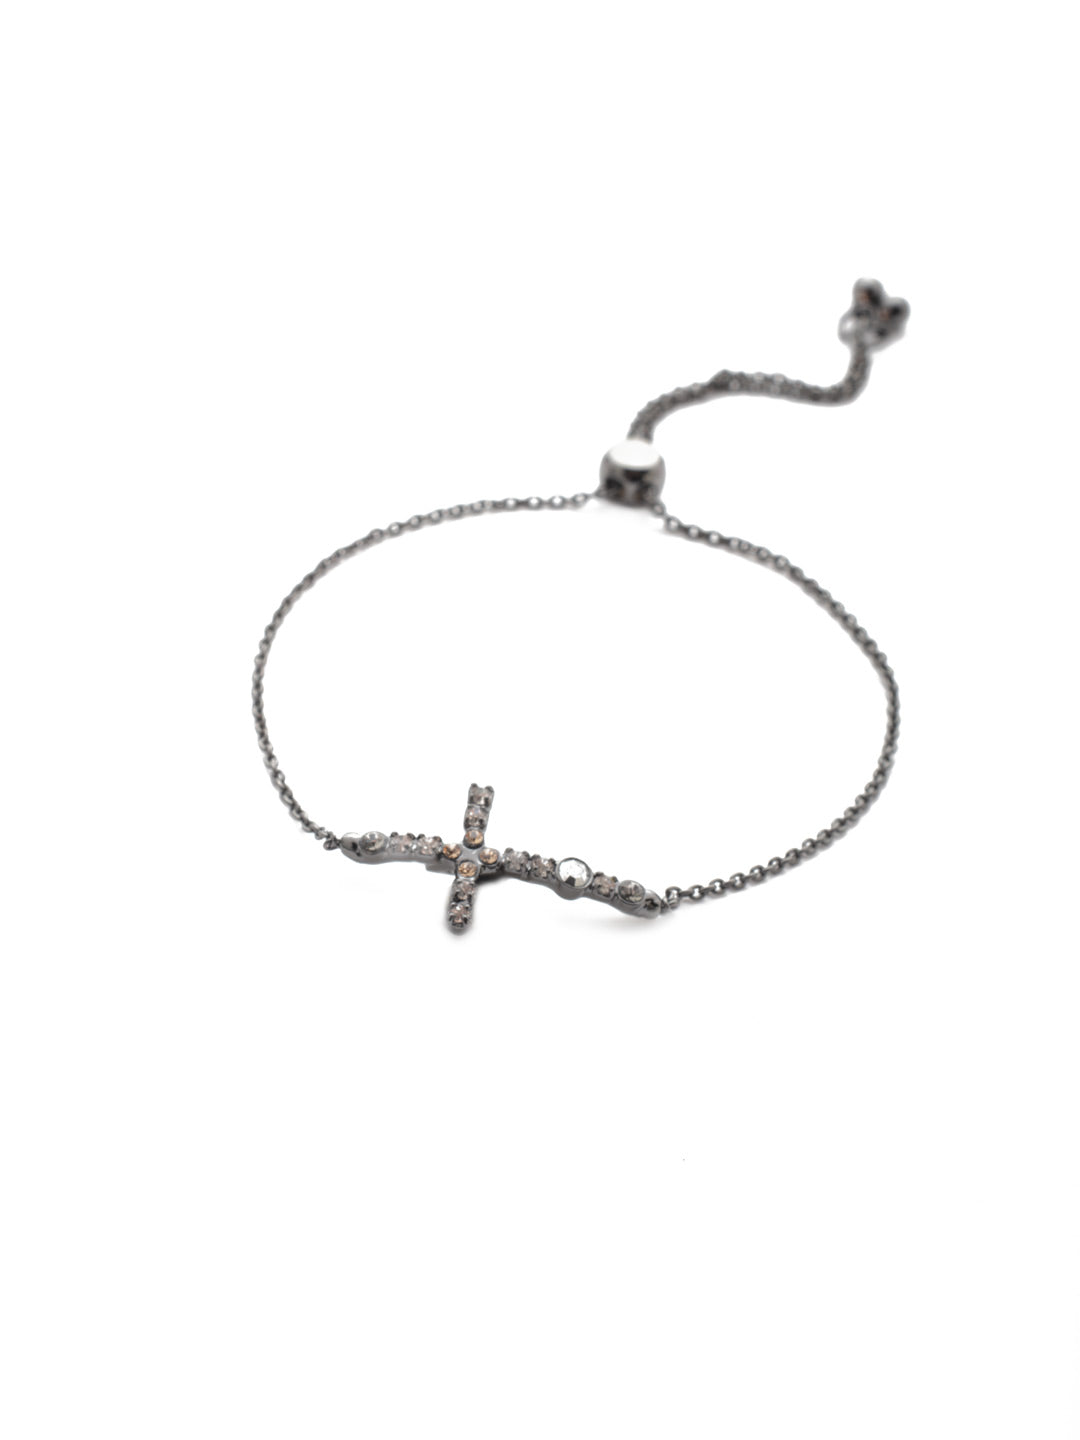 Giovanna Slider Bracelet - BEN1GMGNS - The Giovanna Slider Bracelet features the crystal-encrusted cross fans are looking to slip on. Just adjust to your wrist size and you're set. From Sorrelli's Golden Shadow collection in our Gun Metal finish.